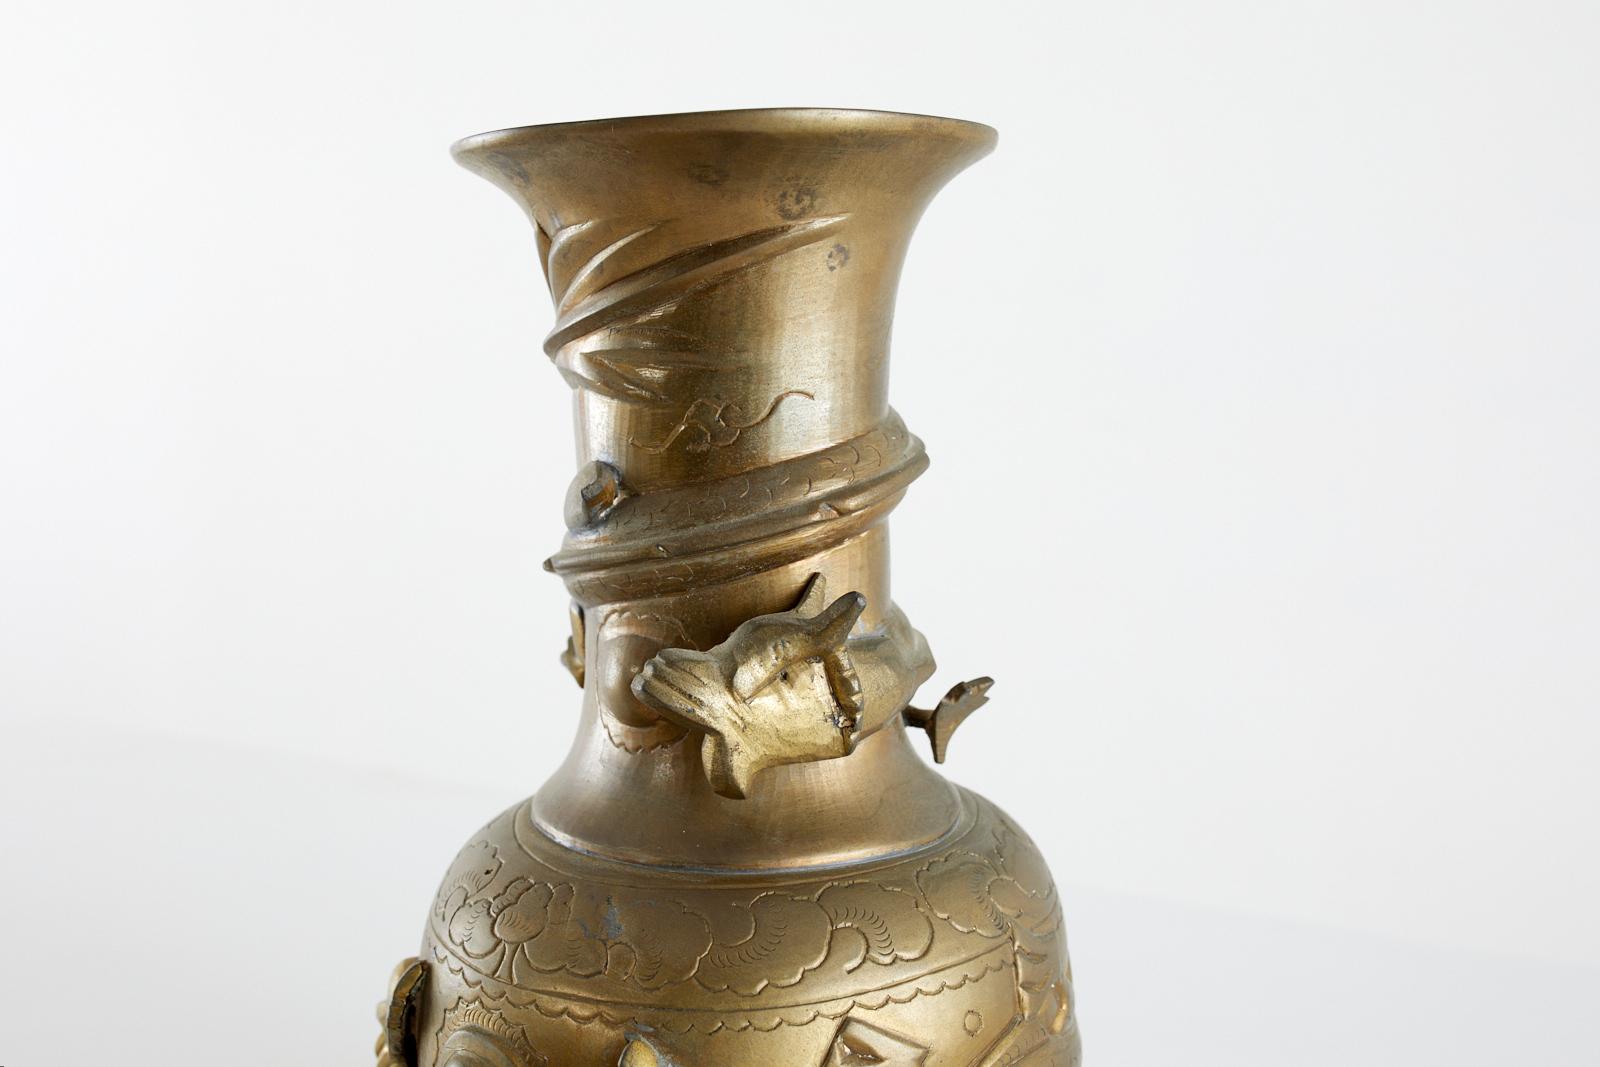 20th Century Chinese Export Brass High Relief Dragon Vase